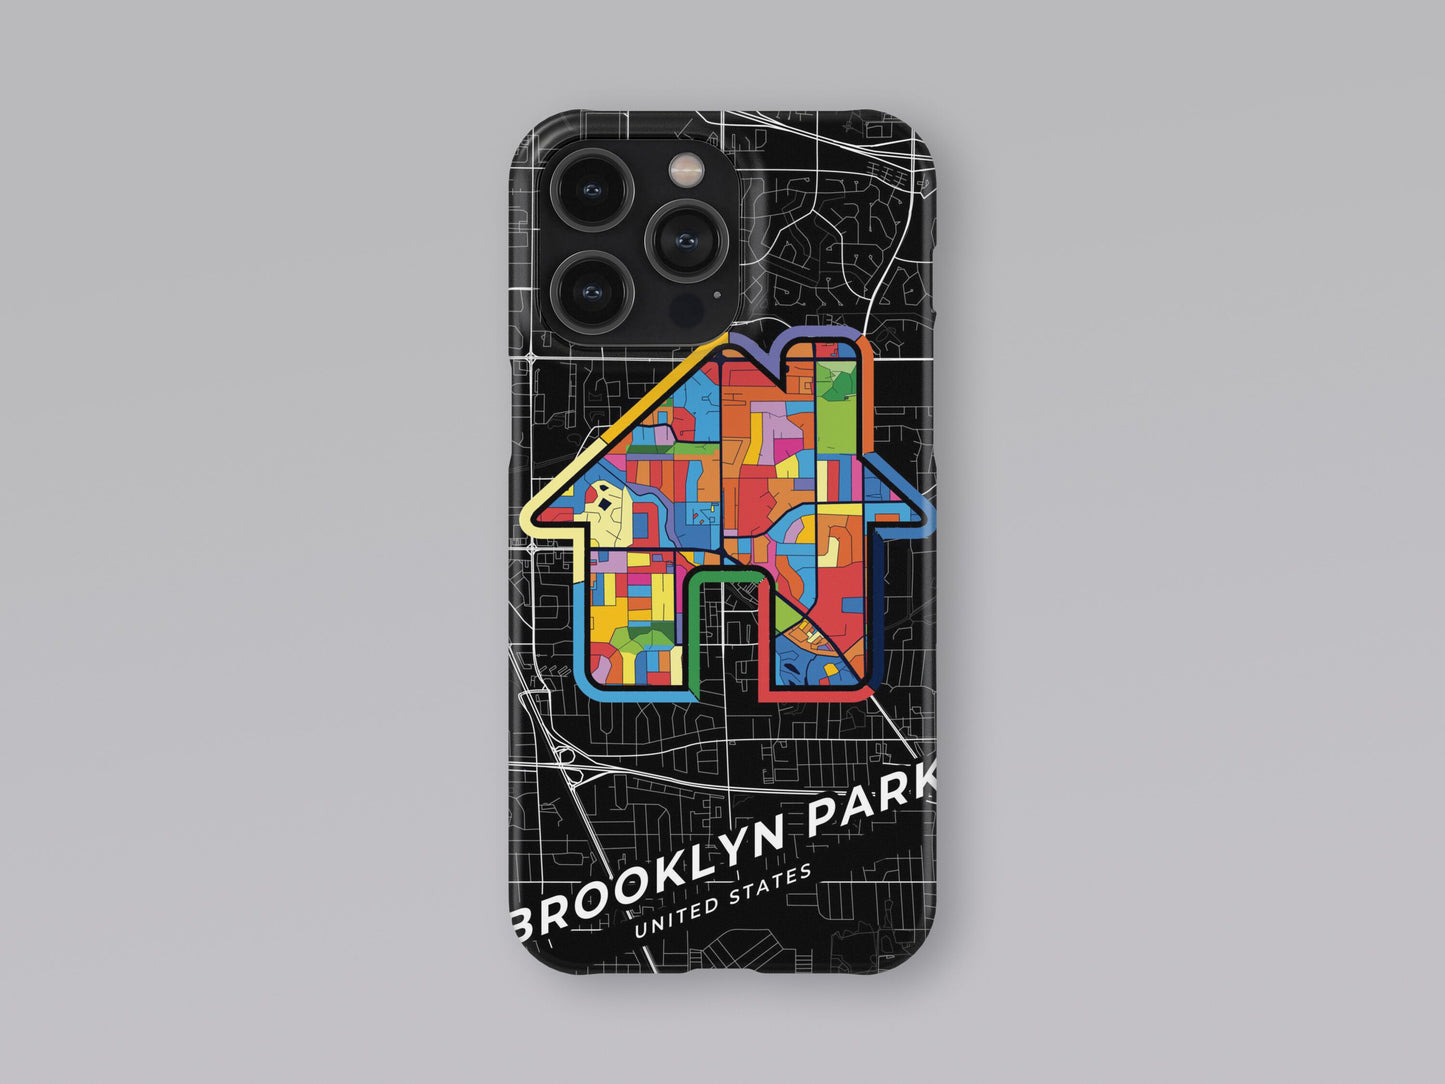 Brooklyn Park Minnesota slim phone case with colorful icon. Birthday, wedding or housewarming gift. Couple match cases. 3